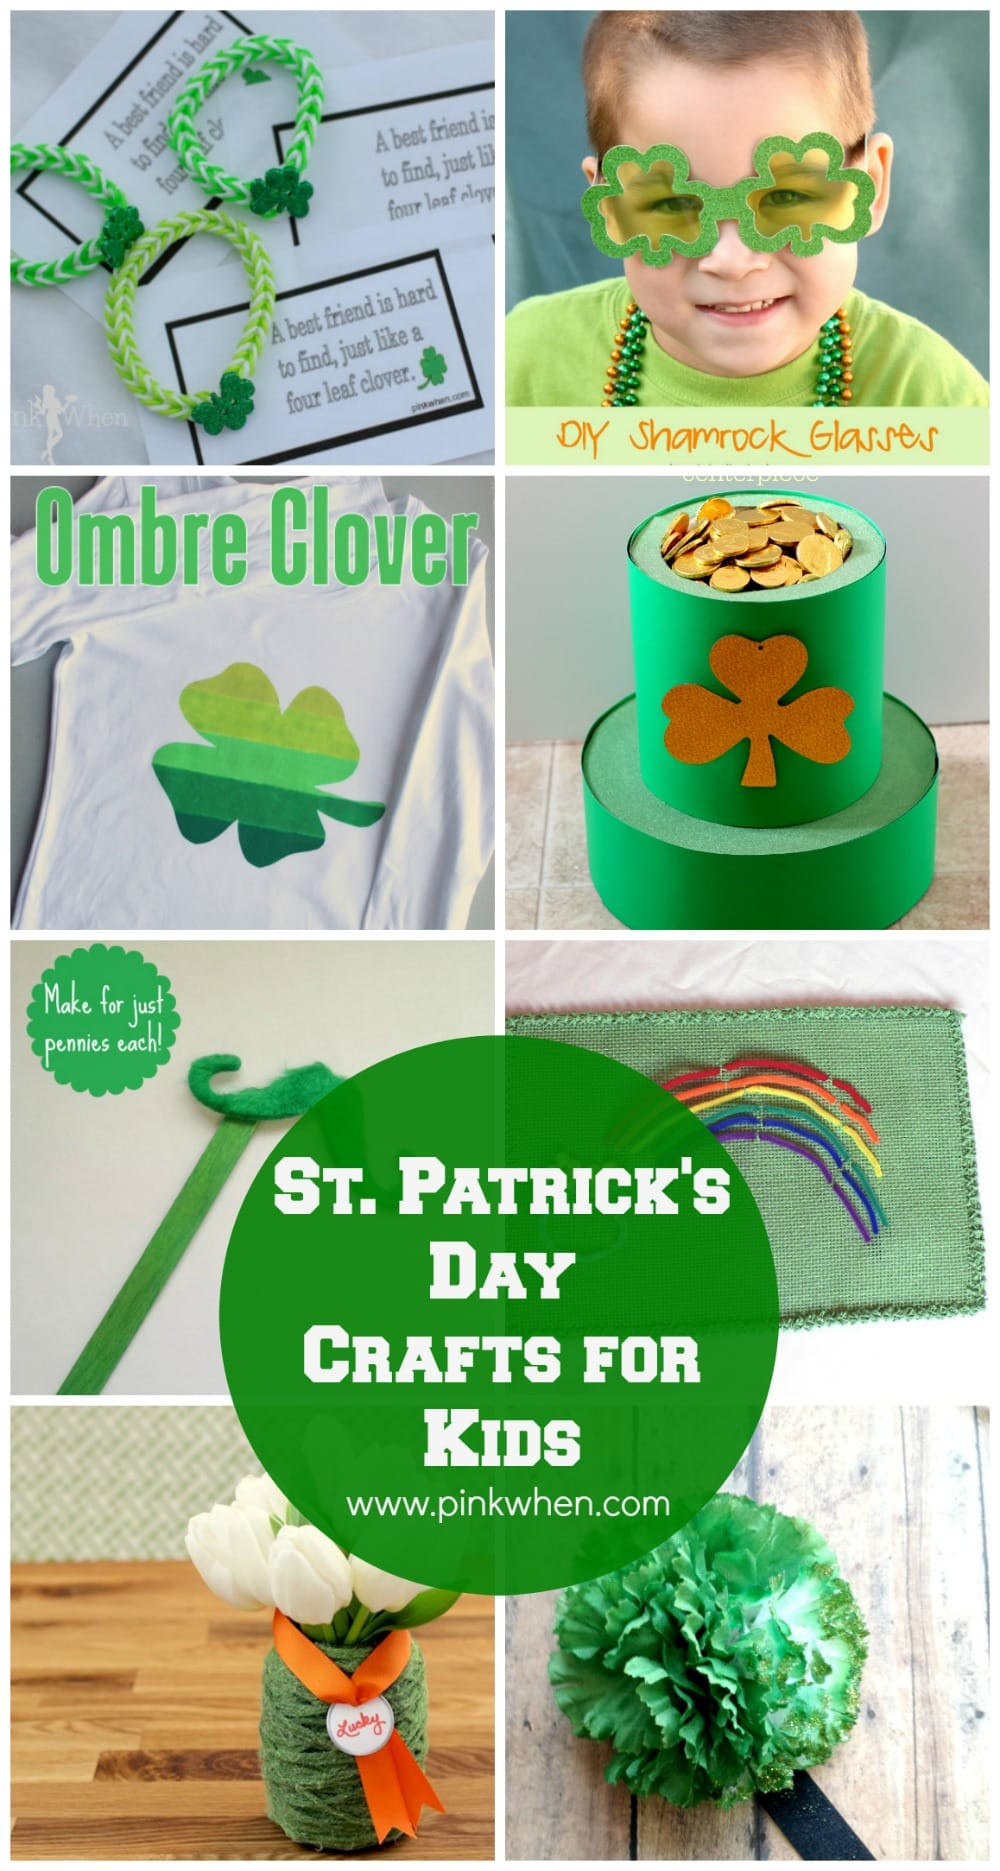 St. Patrick's Day Activities For Kids
 10 St Patrick s Day Crafts for Kids PinkWhen